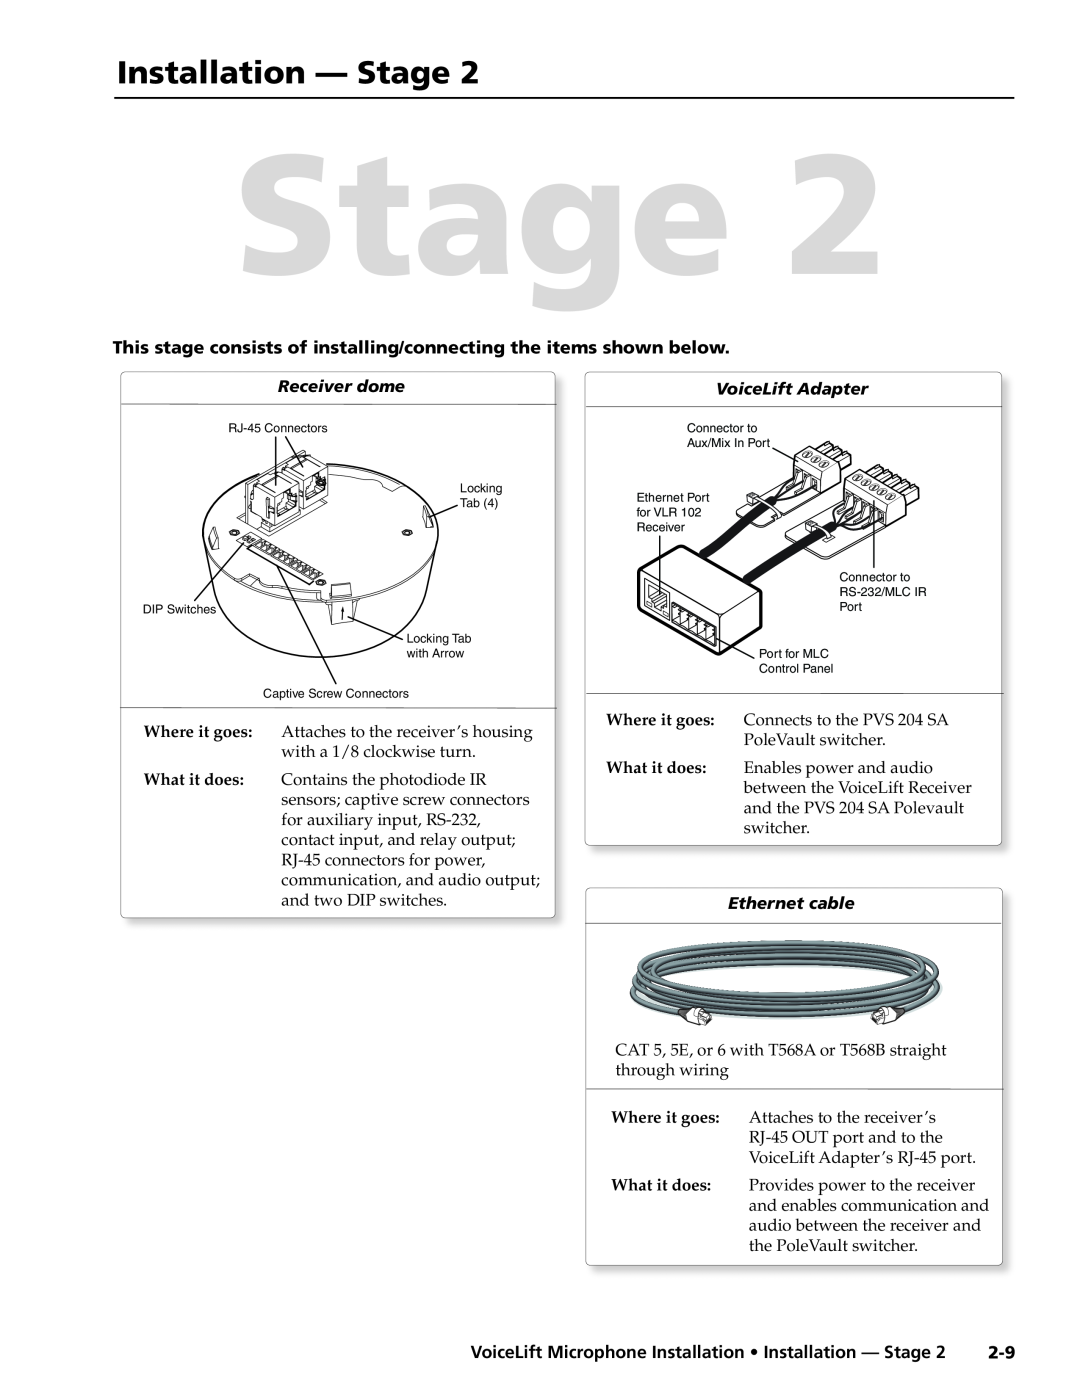 Extron electronic VLM 2000 manual This stage consists of installing/connecting the items shown below, Receiver dome, Stage 